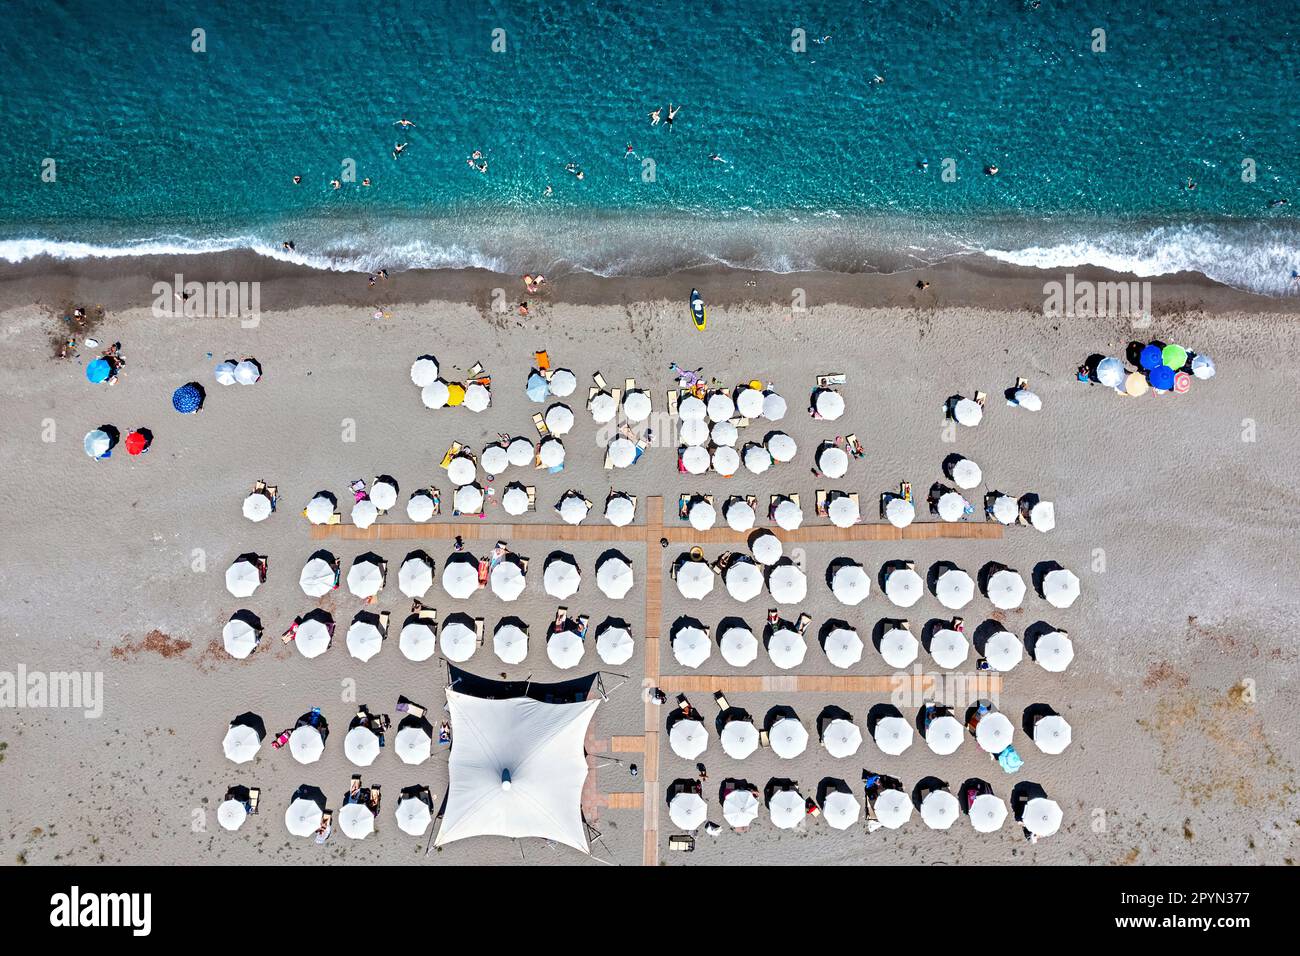 'Detail' (aerial view - drone) of Agiokambos beach one of the longest beaches in Greece (Larissa, Thessaly). Stock Photo